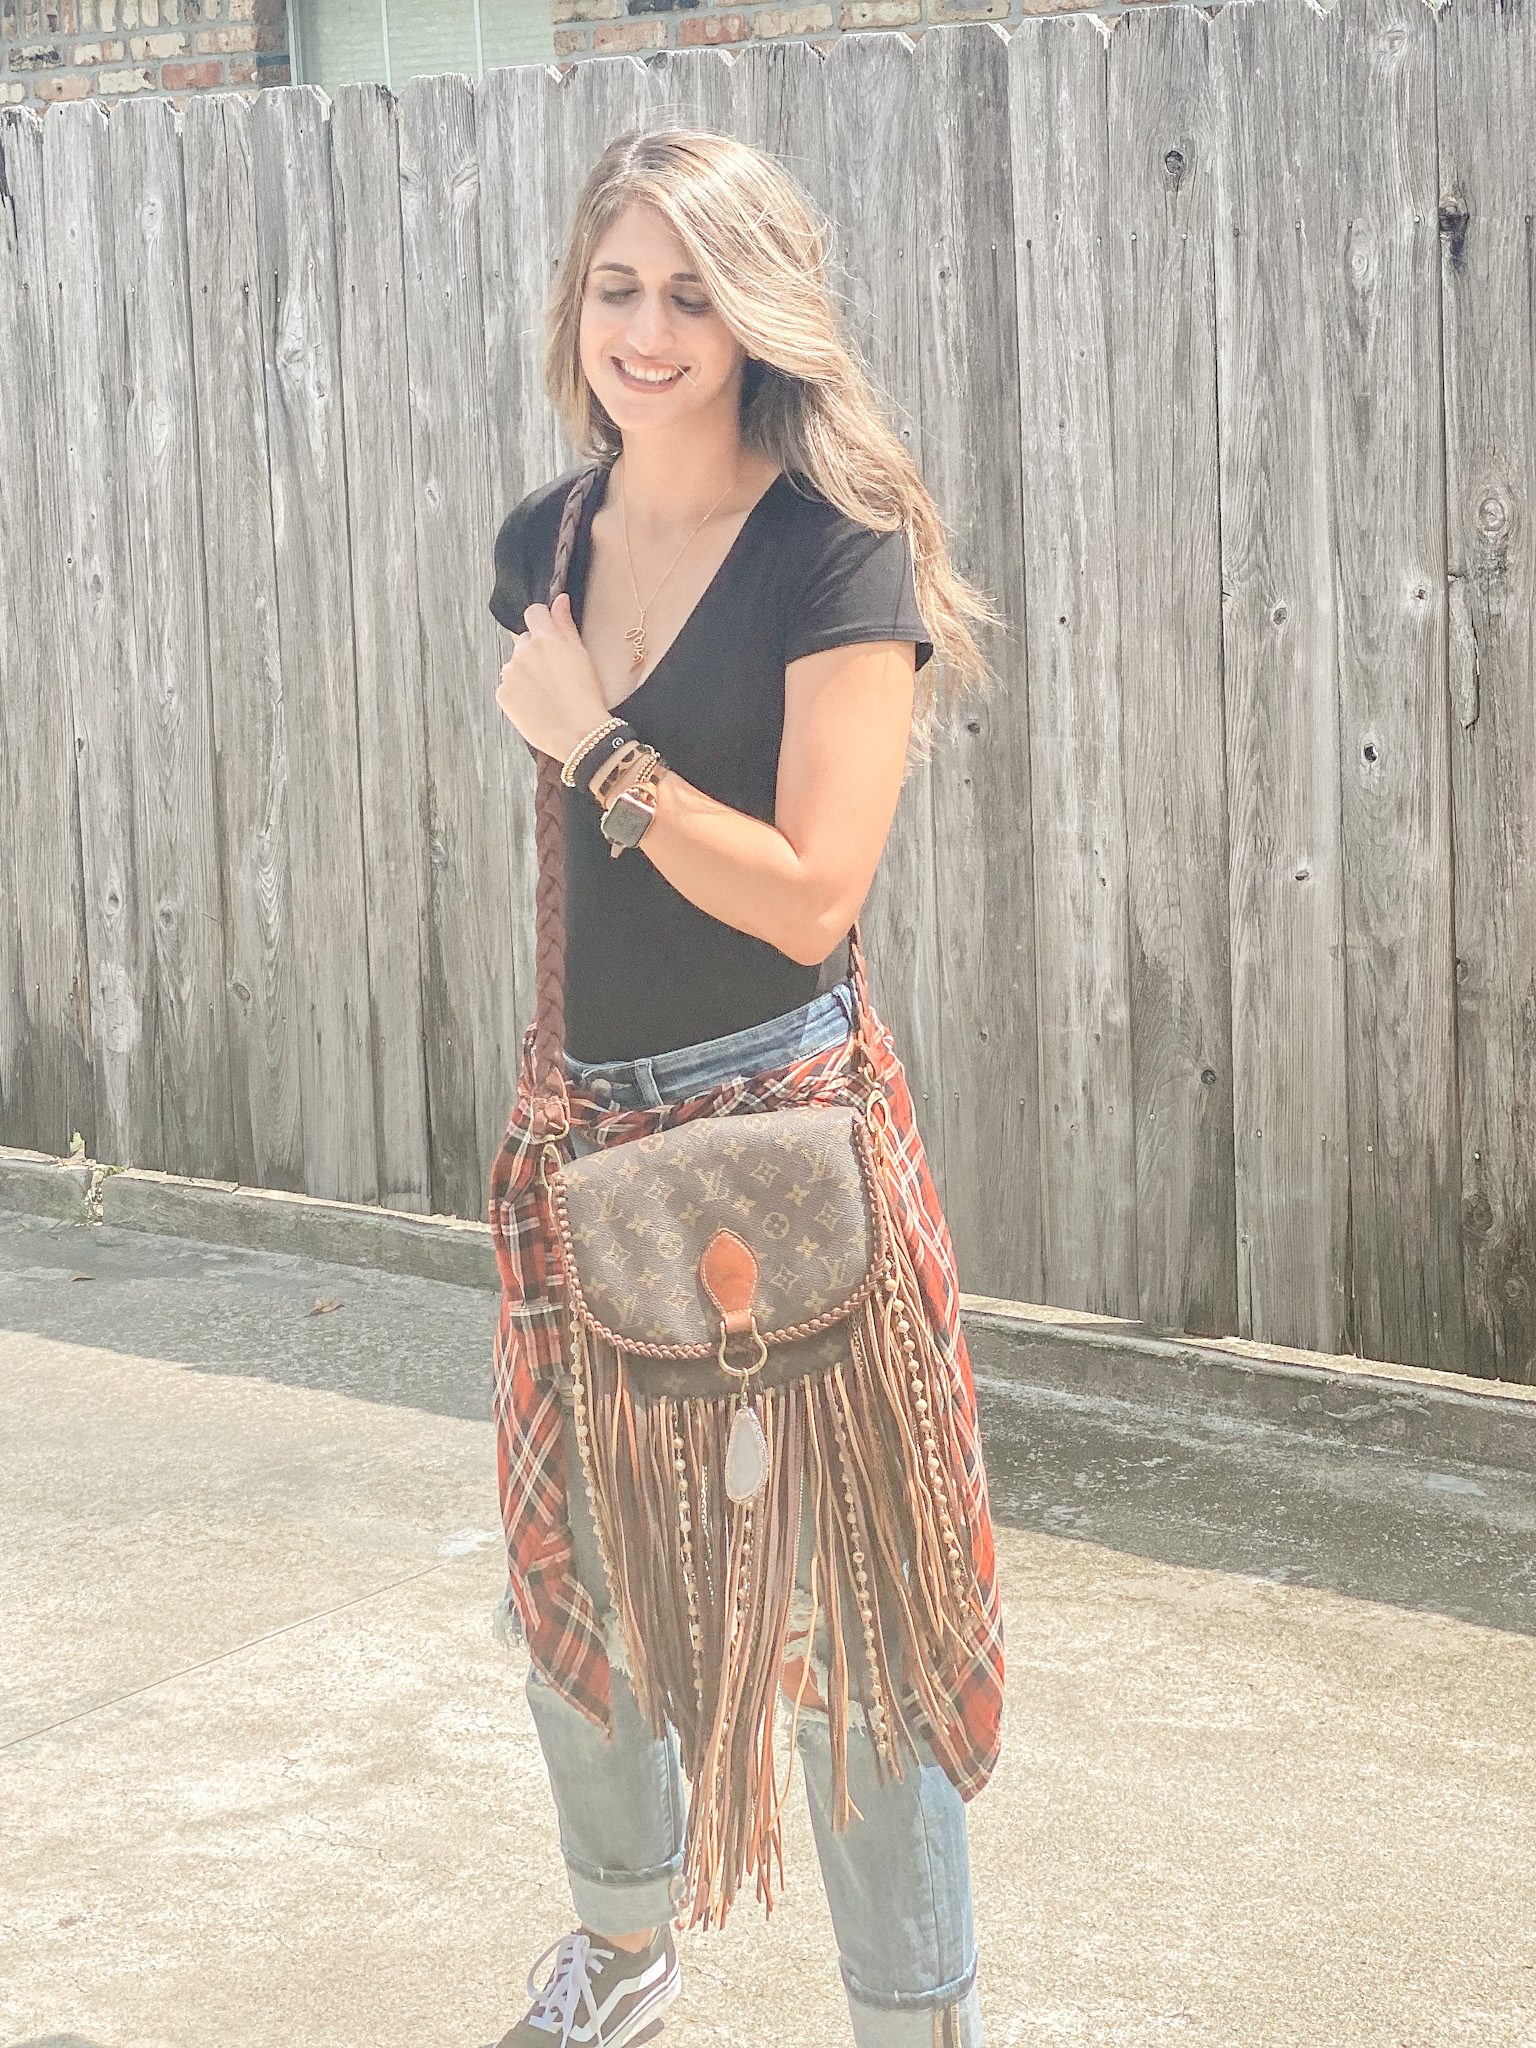 All Collection Bags – Vintage Boho Bags